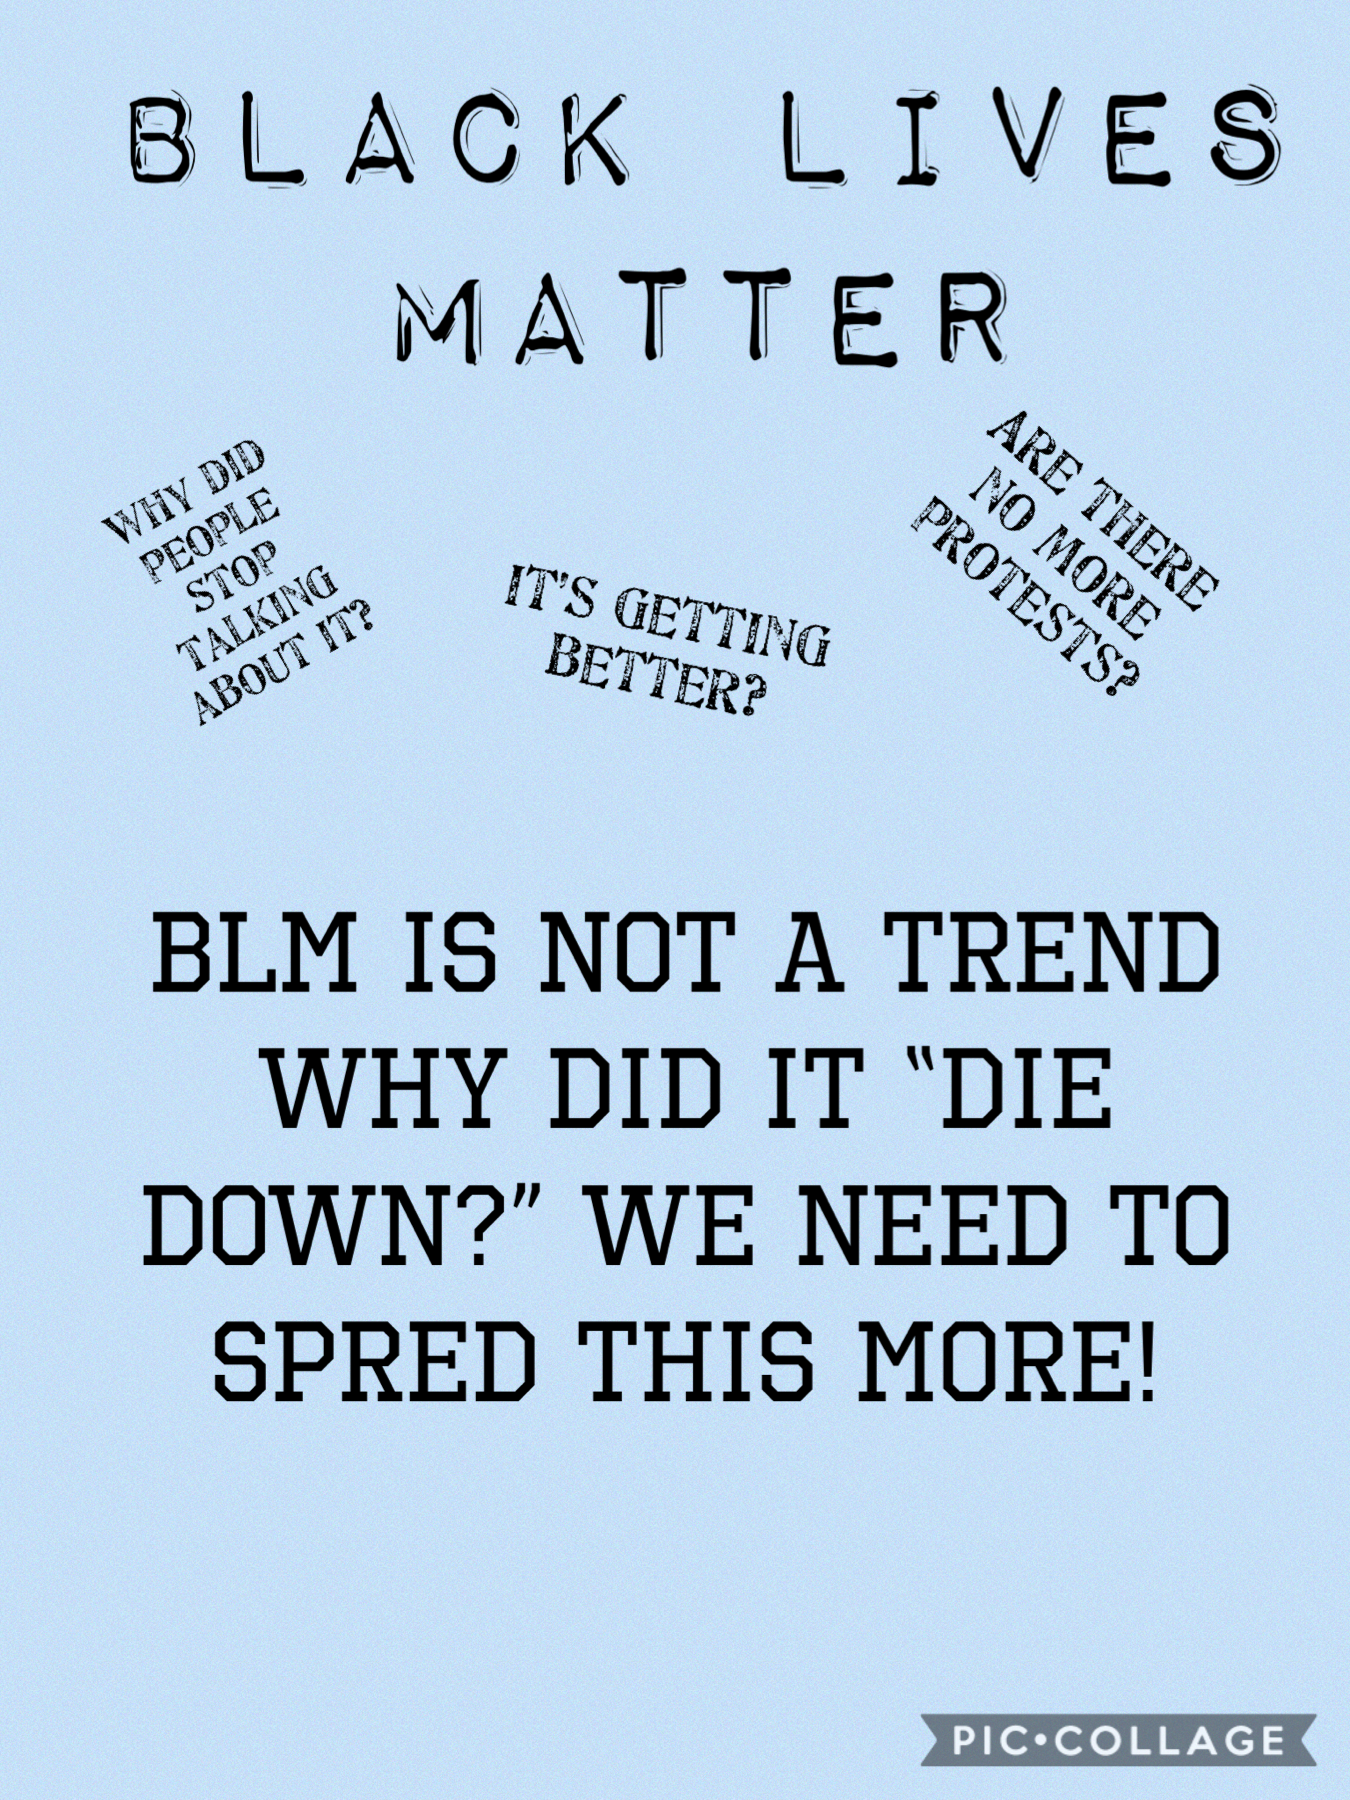 BLM! REMIX THIS POST TO SPREAD BLM!